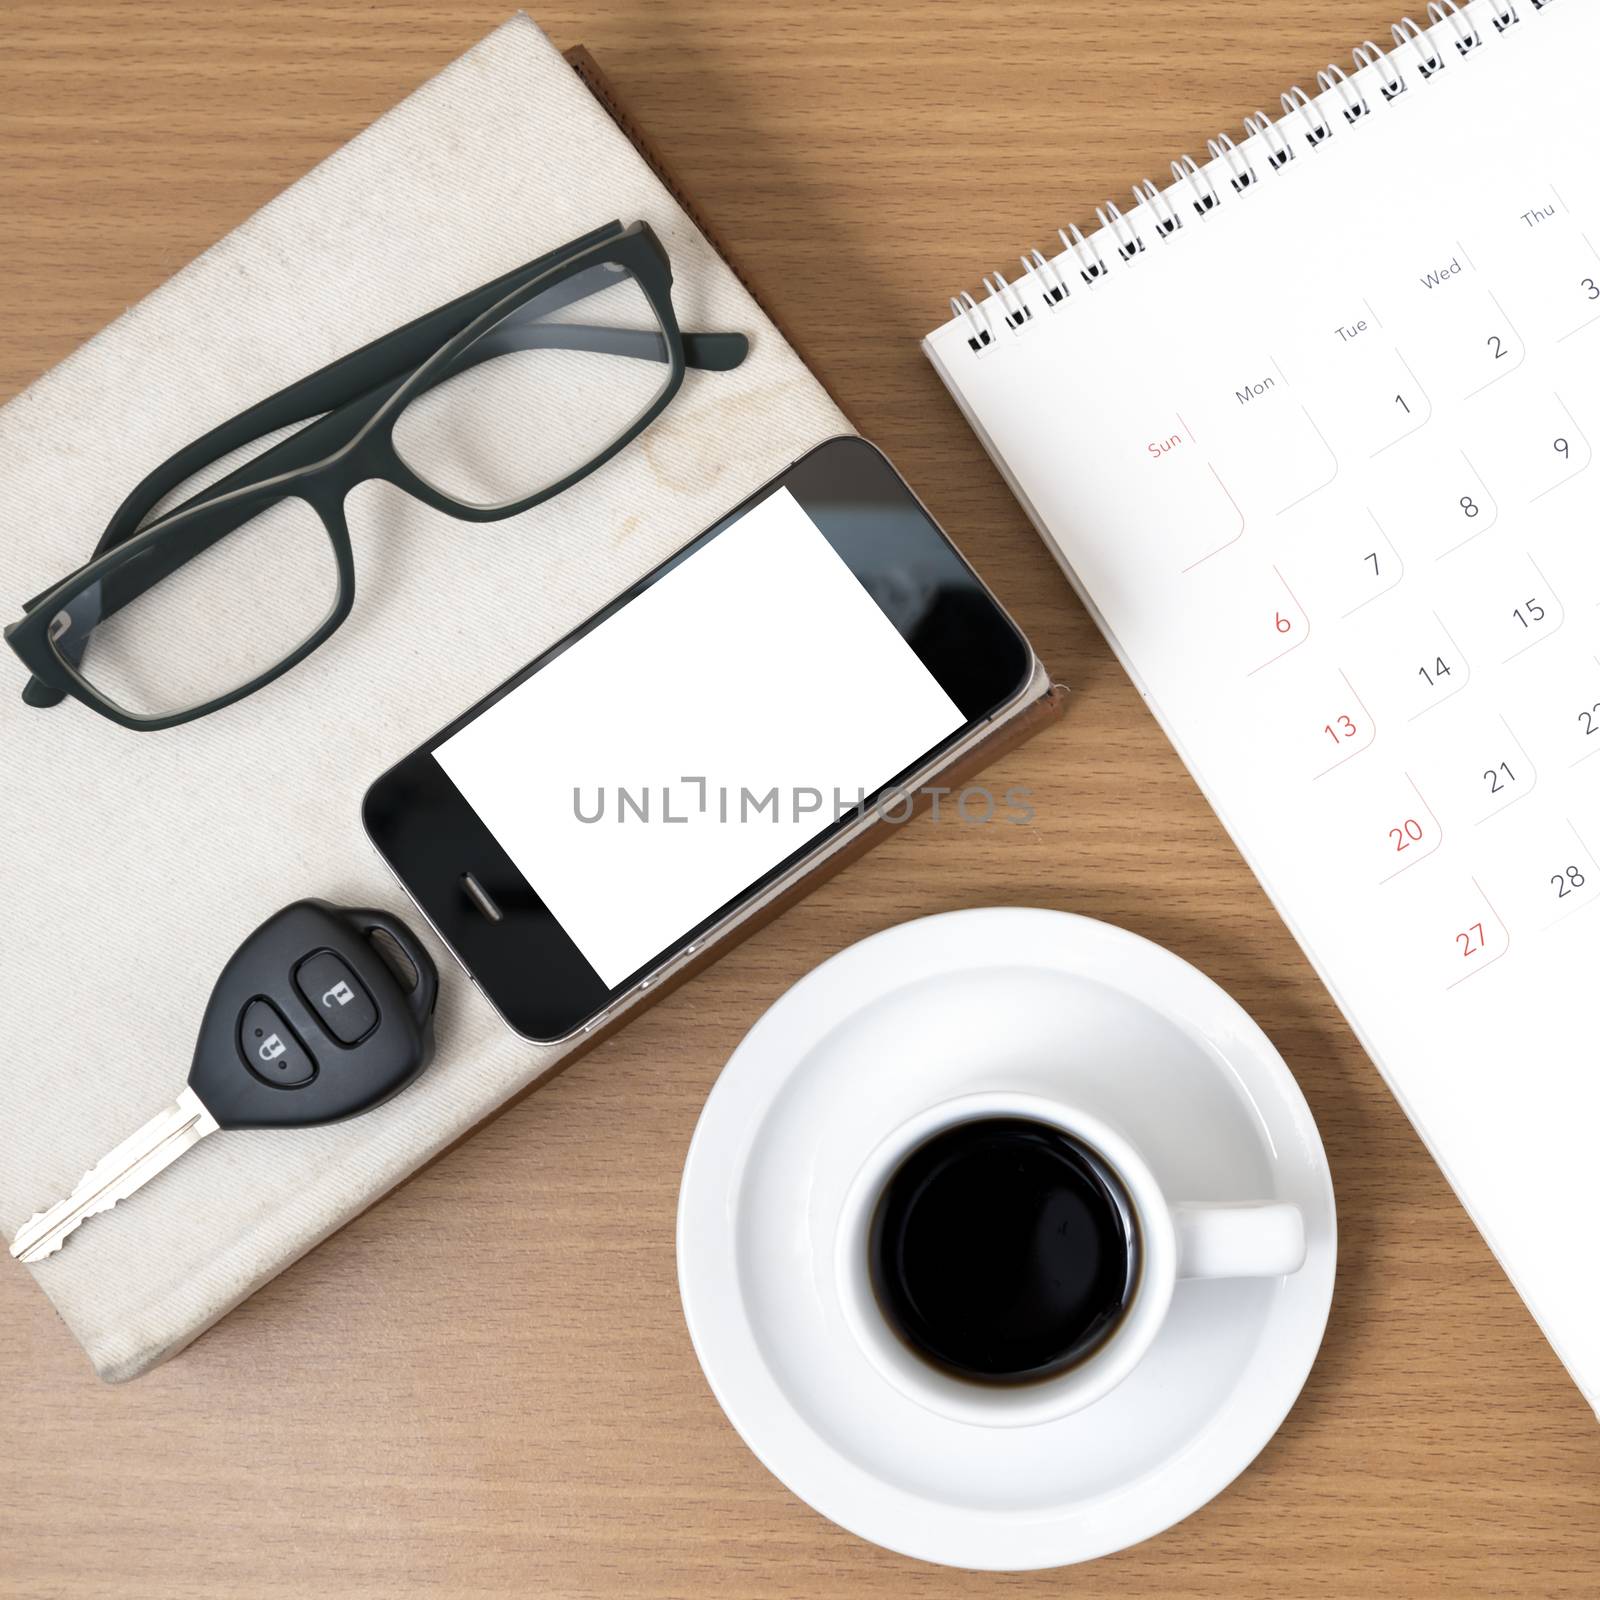 coffee and phone with car key,eyeglasses,stack of book,calendar on wood background